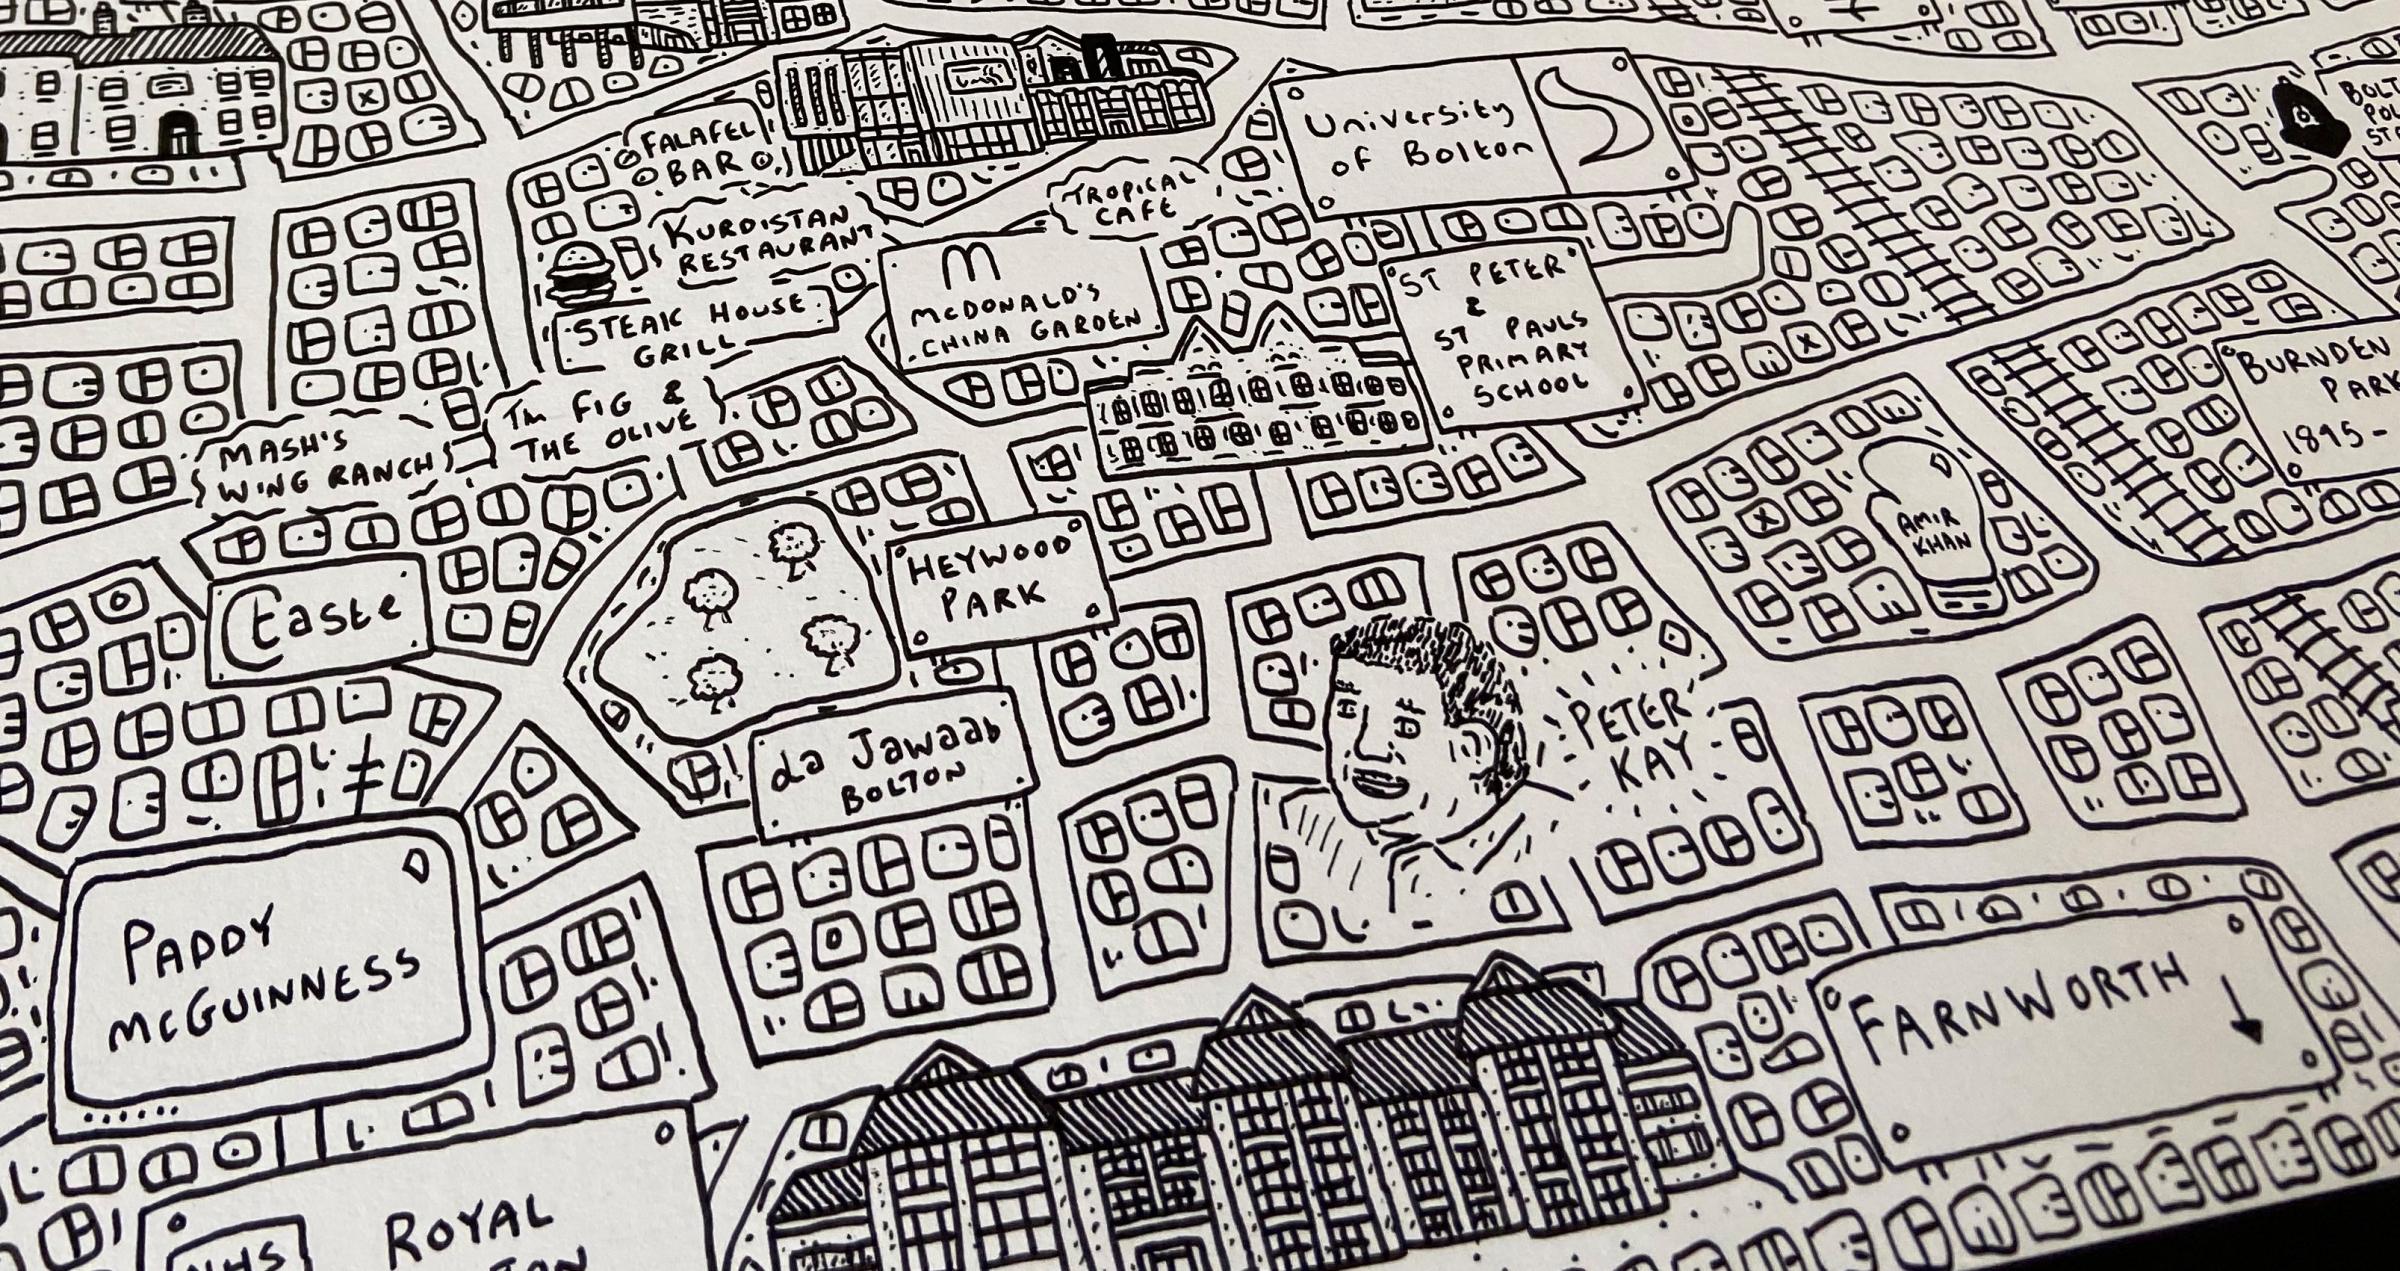 Bolton Doodle Map by Dave Draws - cropped